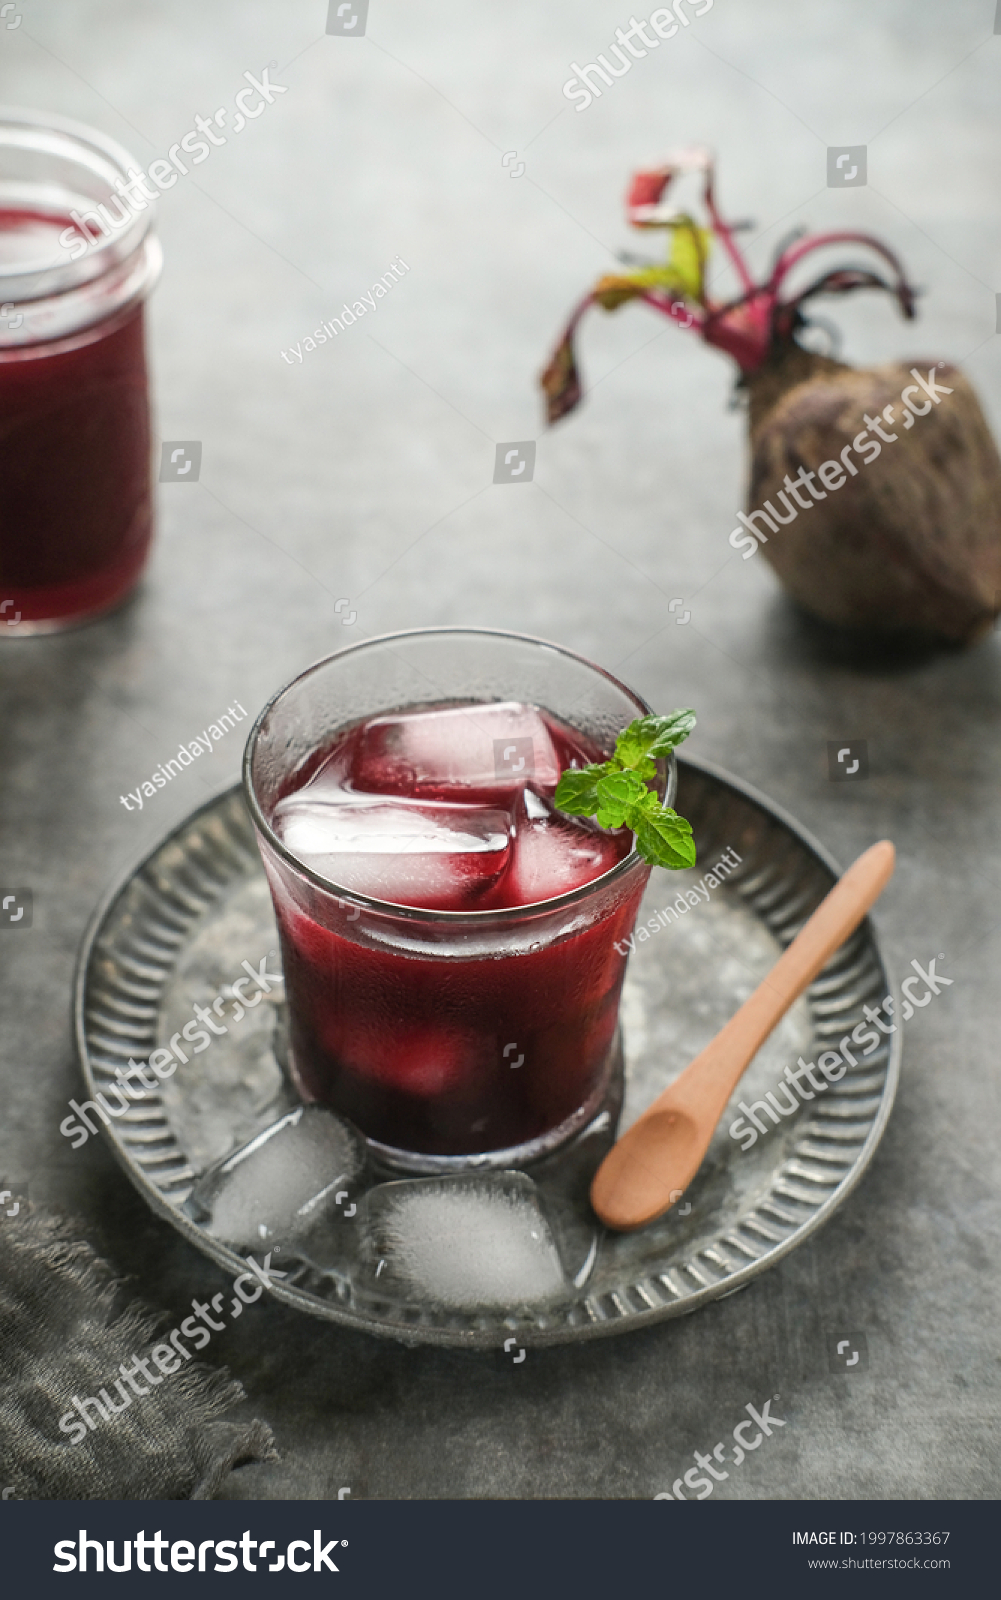 Healthy Beetroot juice, served in glass. Close up and copy space. Selective focus image, blurred backgroundd.
 #1997863367